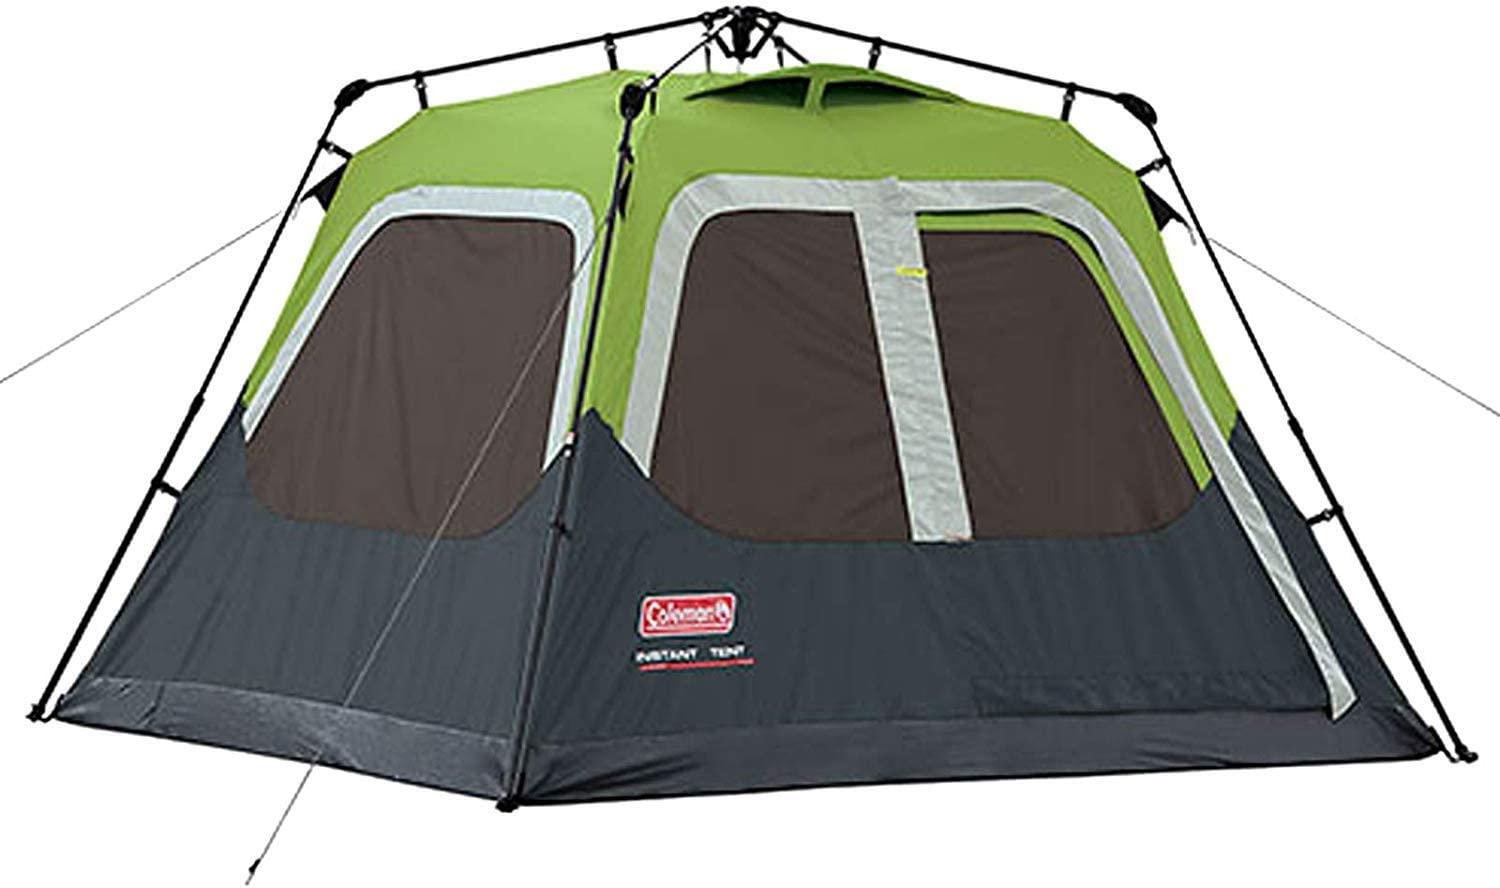 COLEMAN INSTANT TENT 6 person WITH RAIN FLY